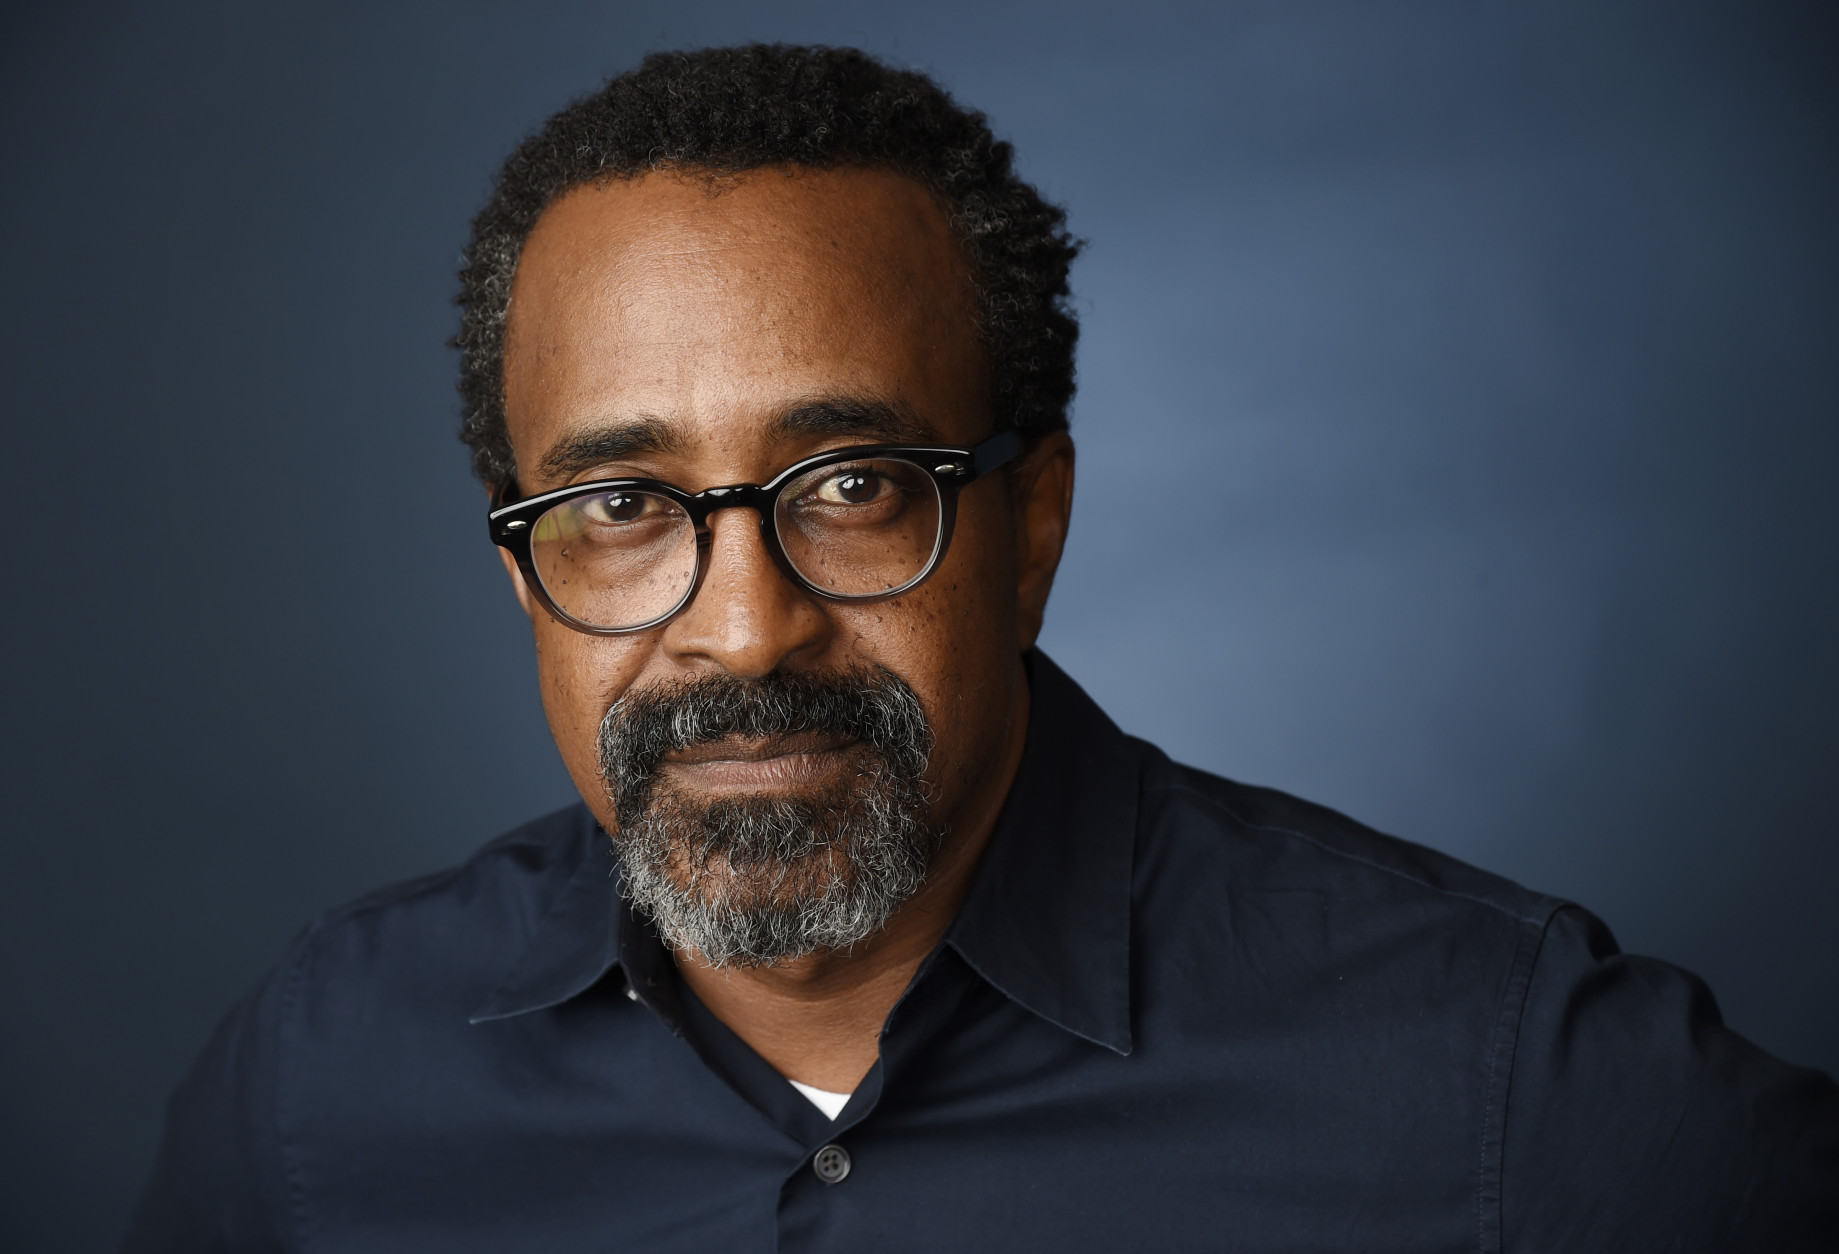 Tim Meadows, a cast member in the FOX series "Son of Zorn," poses for a portrait during the 2016 Television Critics Association Summer Press Tour at the Beverly Hilton on Monday, Aug. 8, 2016, in Beverly Hills, Calif. (Photo by Chris Pizzello/Invision/AP)